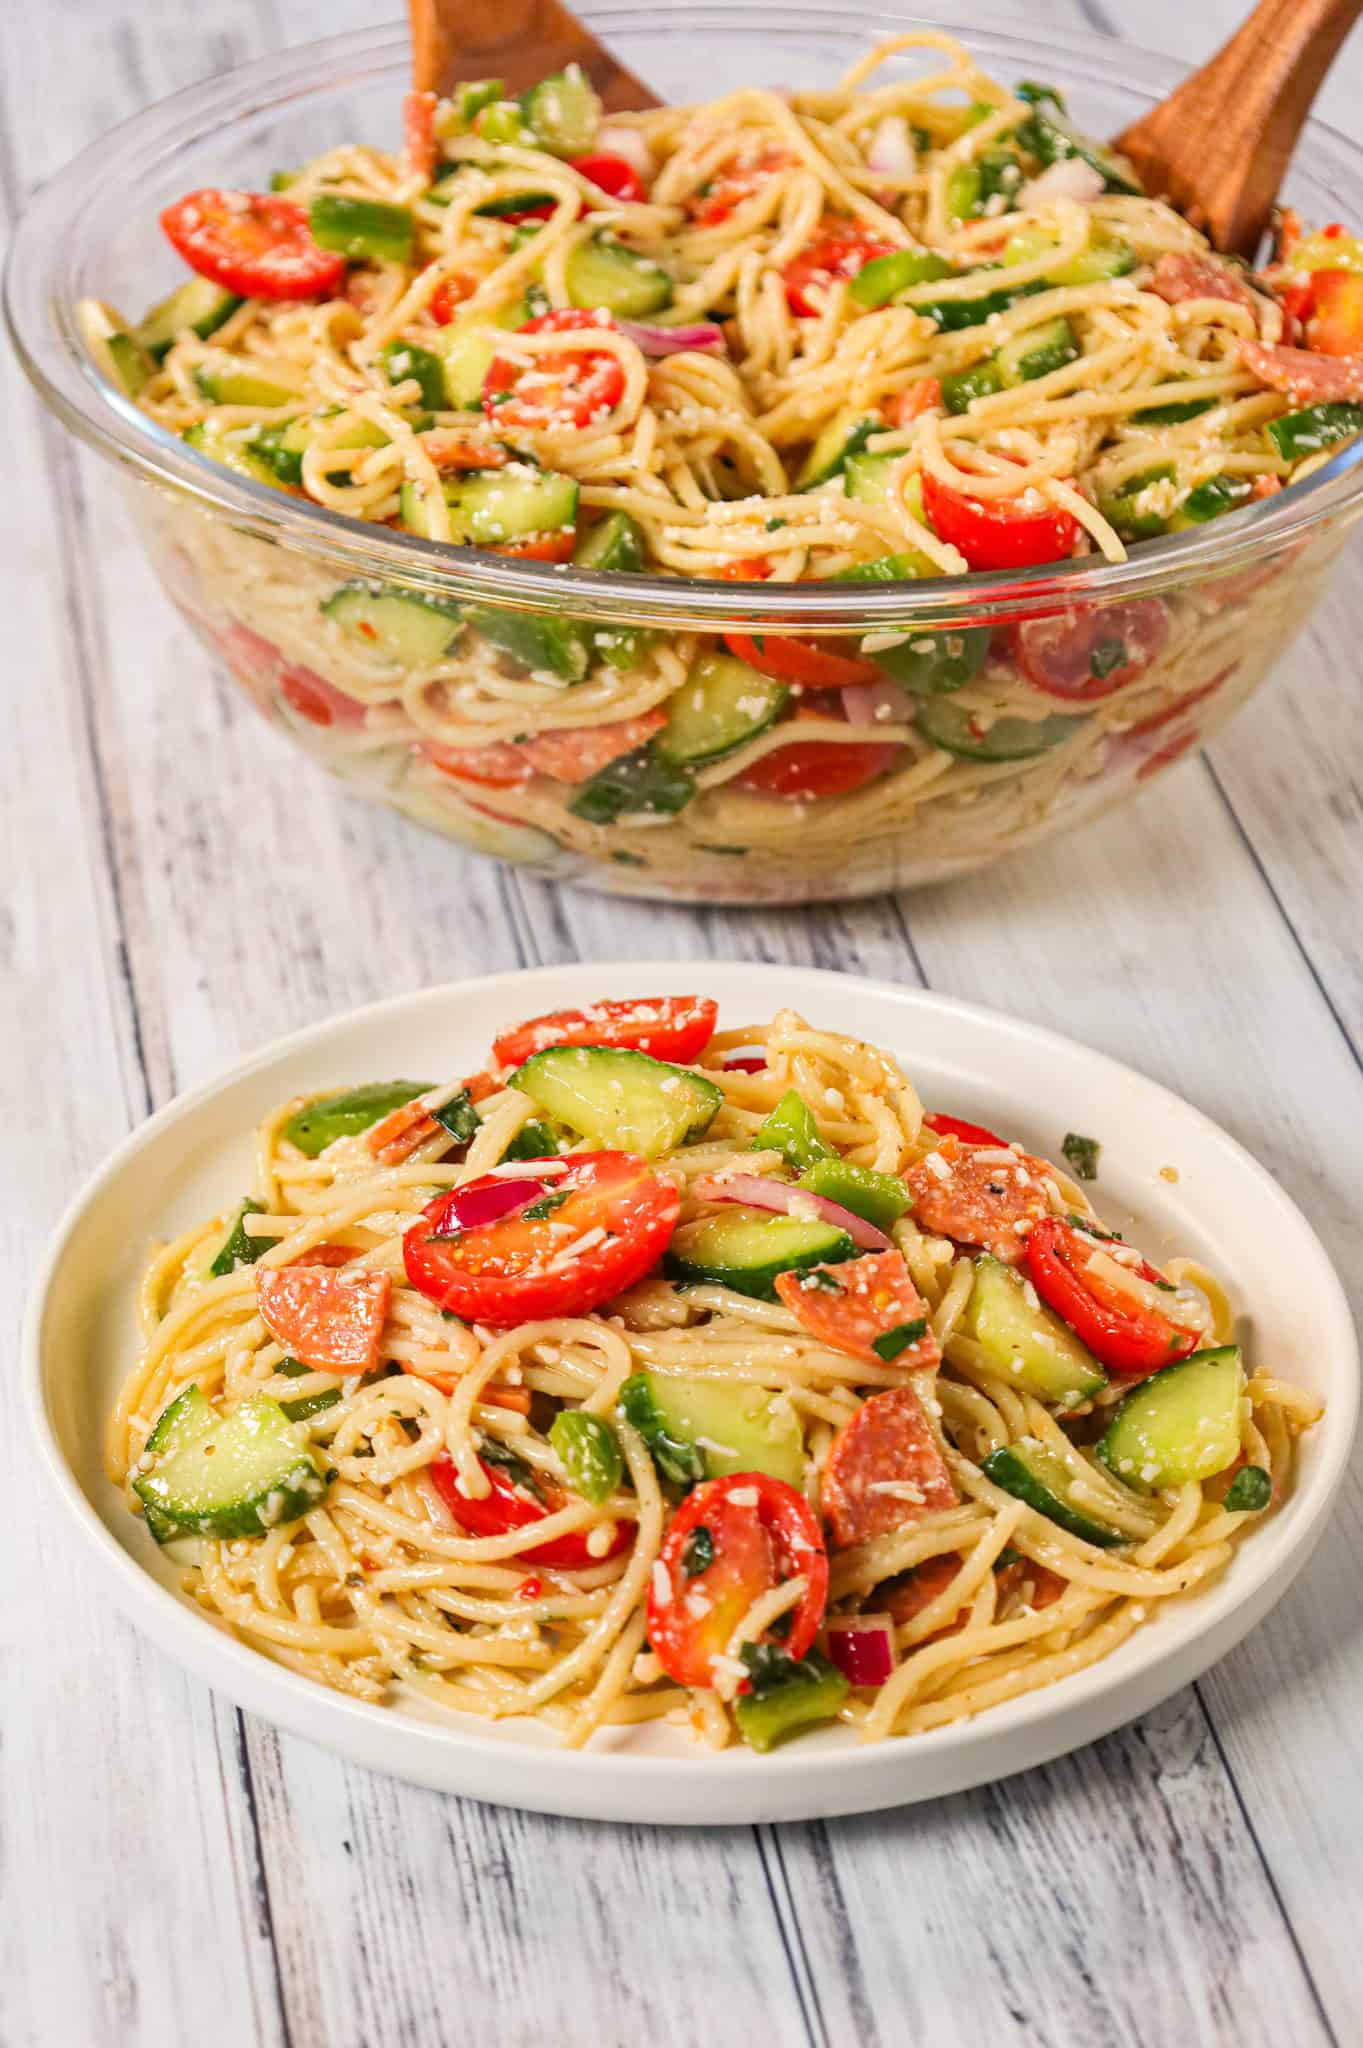 Spaghetti Salad is a tasty pasta salad recipe loaded with cucumbers, grape tomatoes, green peppers, red onions, pepperoni and grated parmesan all tossed in Italian dressing.